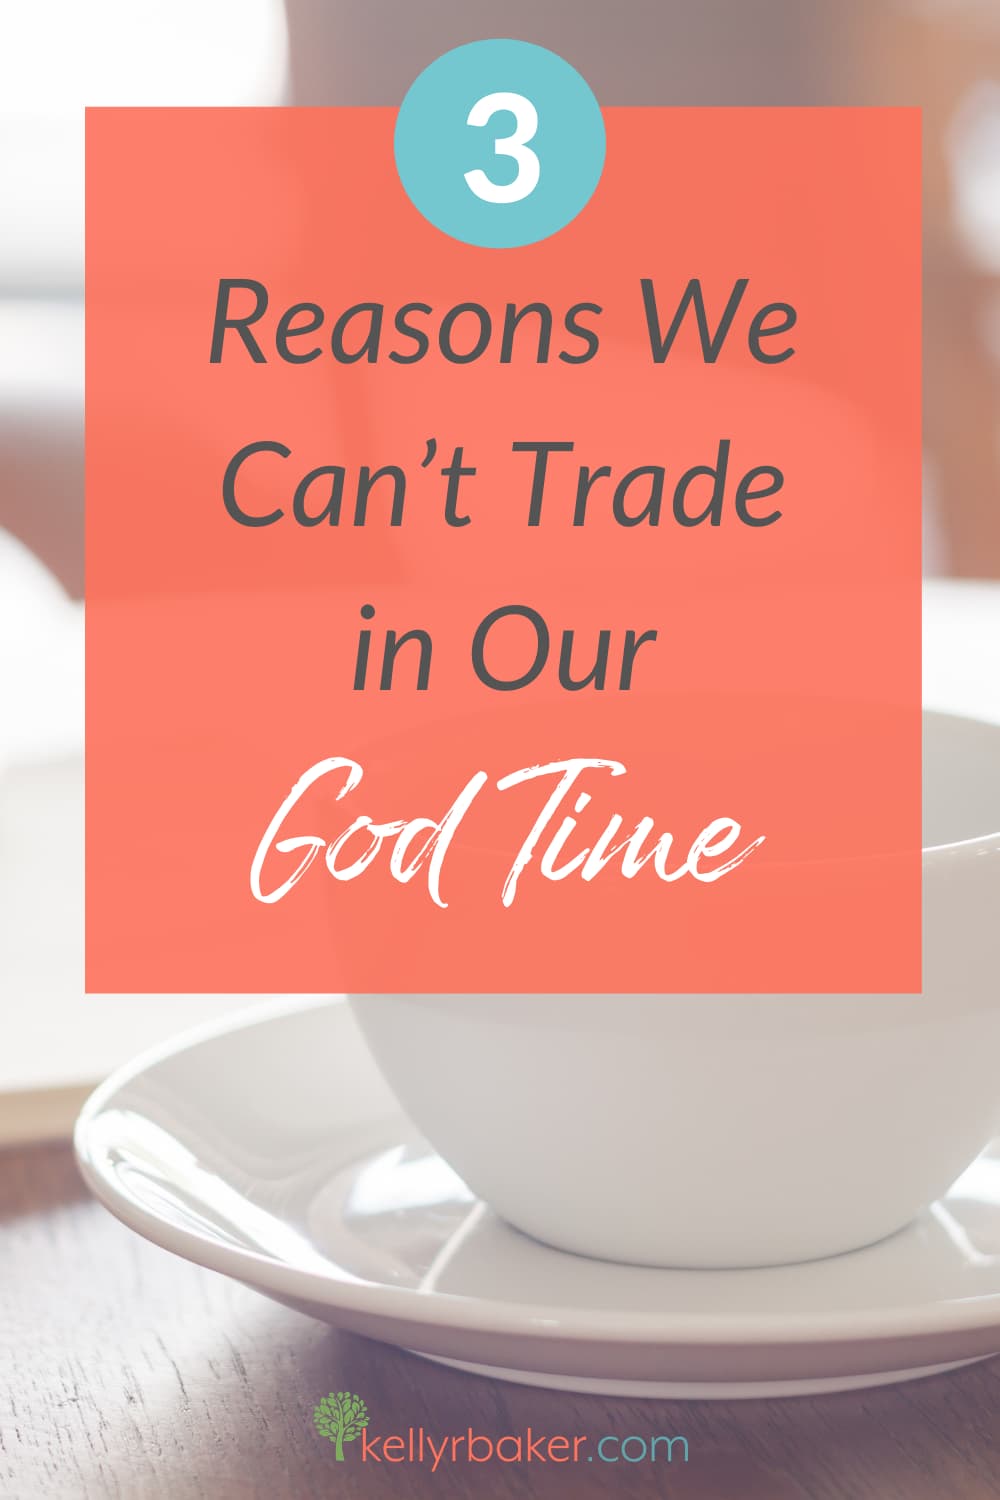 3 Reasons We Can’t Afford to Trade in Our God Time